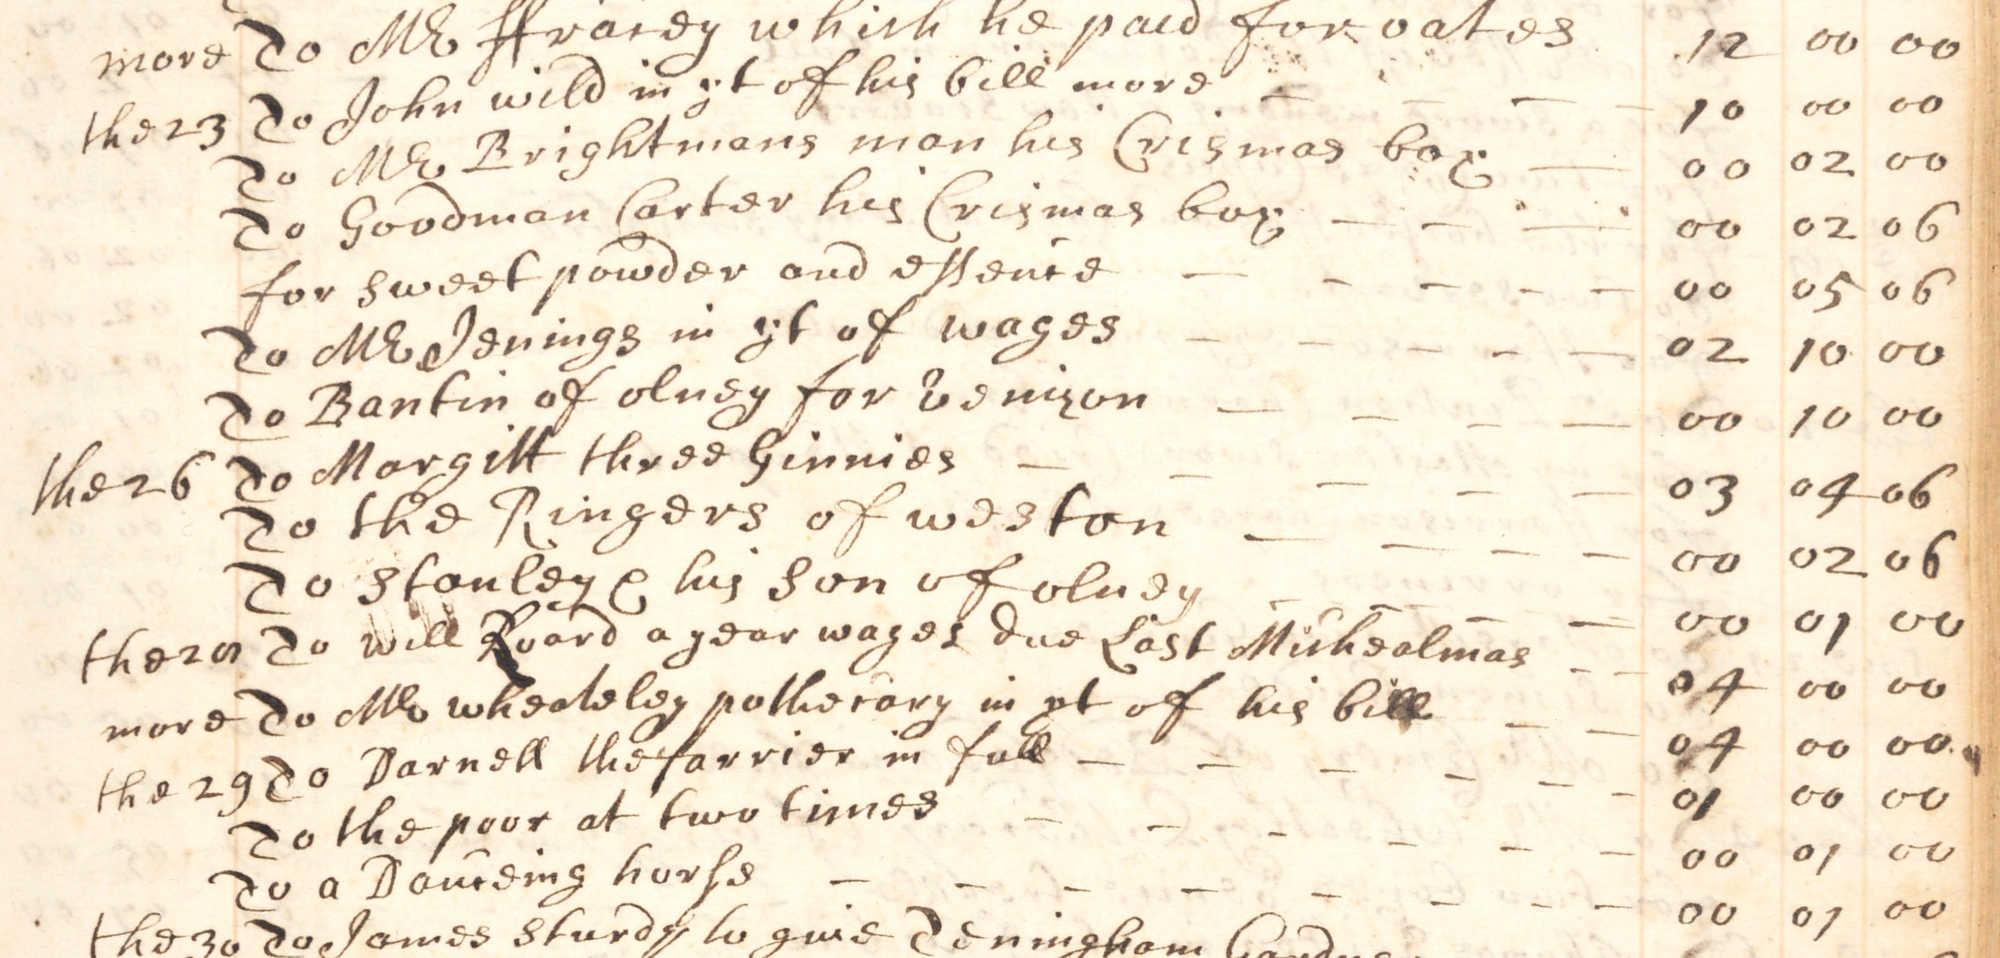 1699 document in handwritten English referring to Christmas boxes and a dancing horse